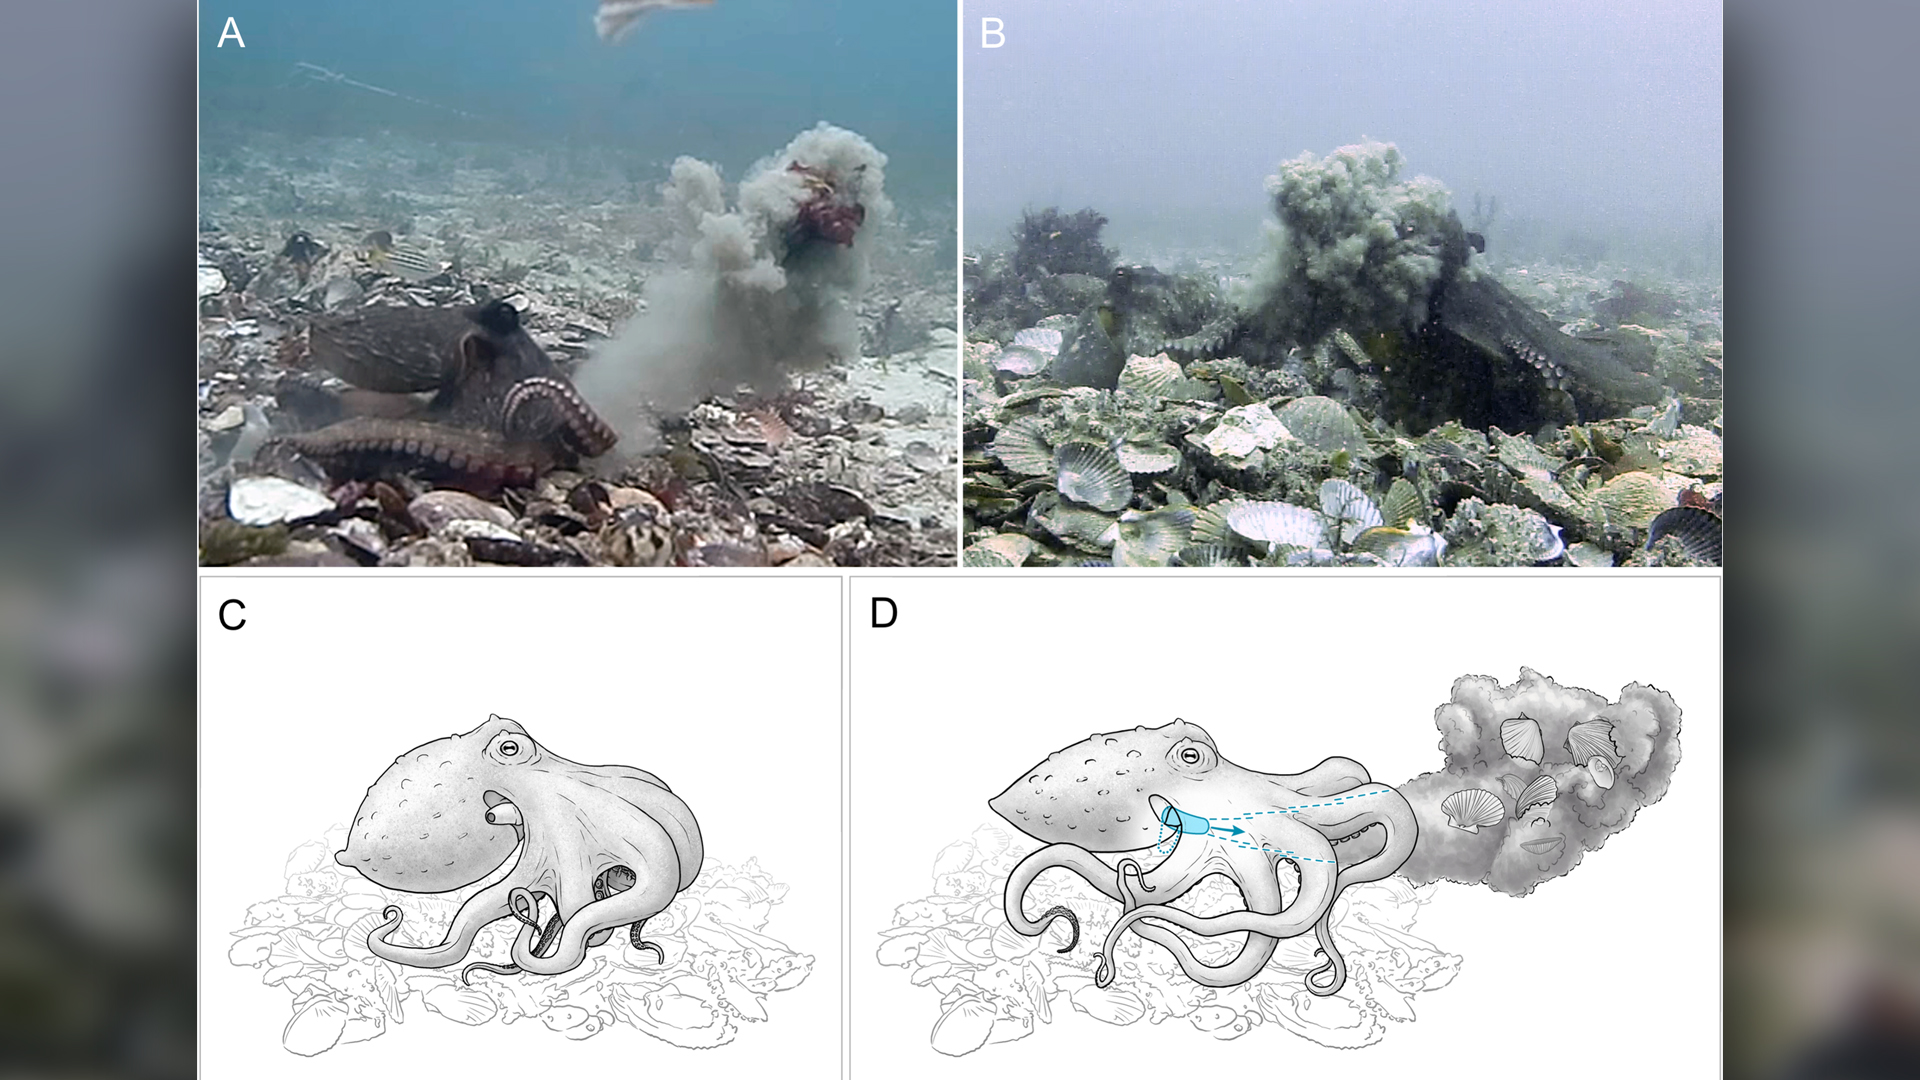 Debris throwing by Octopus tetricus in the wild. A) Octopus (left) projects silt and kelp through the water; B) an octopus (right) is hit by a cloud of silt projected through the water by a throwing octopus; C) shells, silt, algae or some mixture is held in the arms preparatory to the throw; D) siphon is brought down over rear arm and under the web and arm crown, and water is forcibly expelled through the siphon.